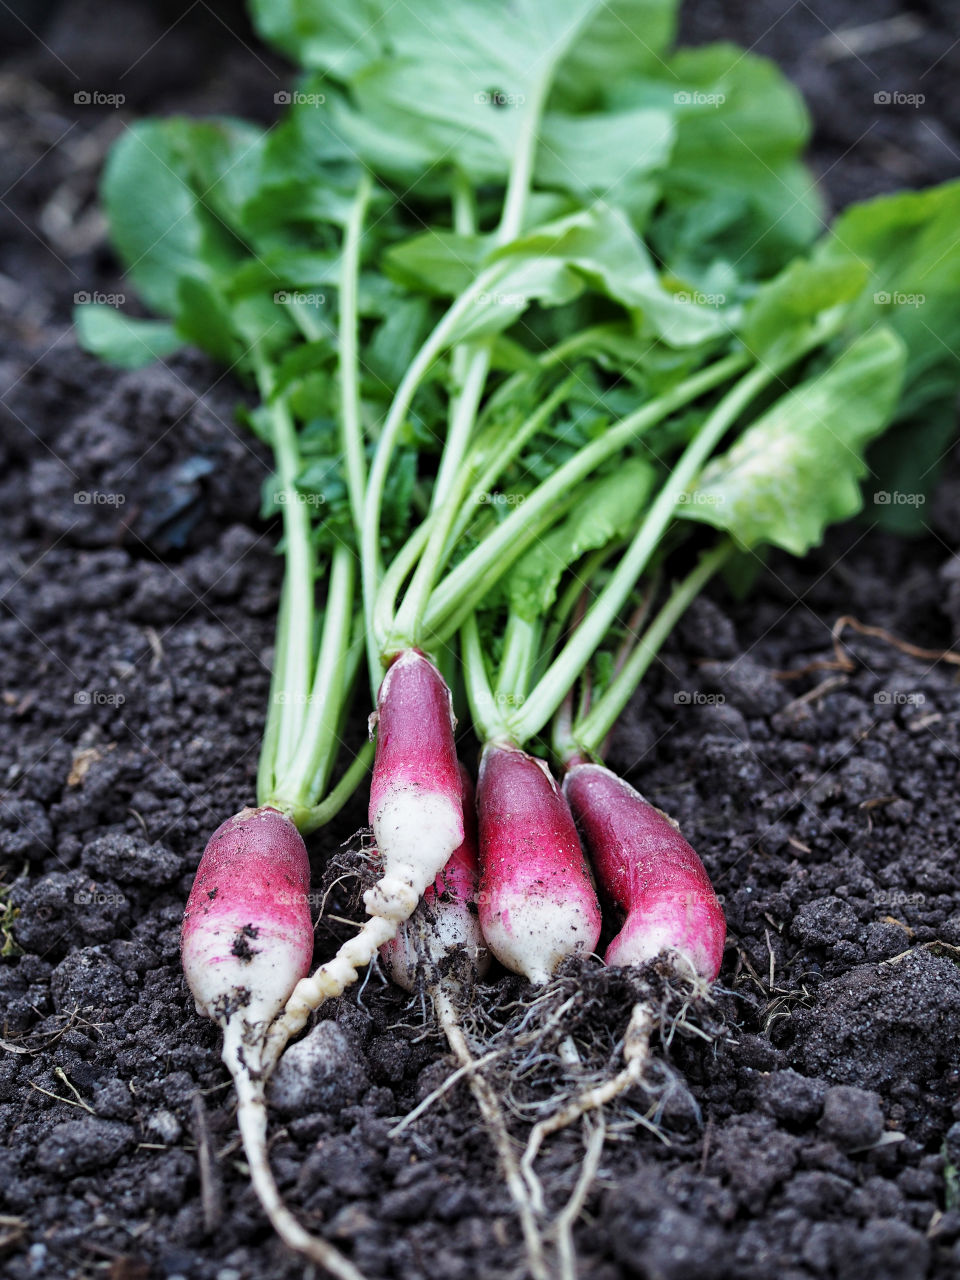 French radishes fresh from the garden 